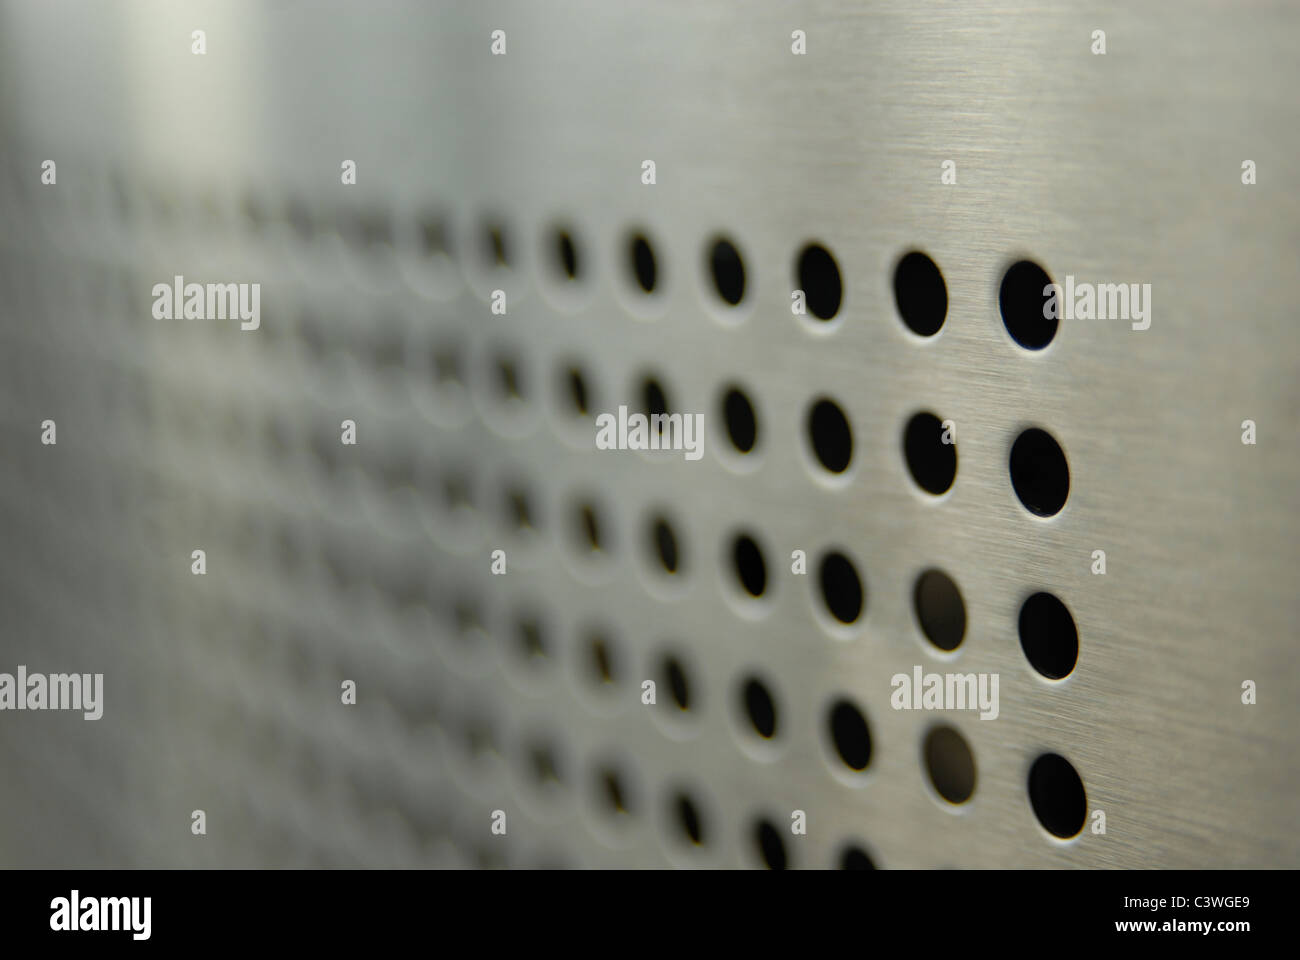 Aligned perforations on metallic surface Stock Photo